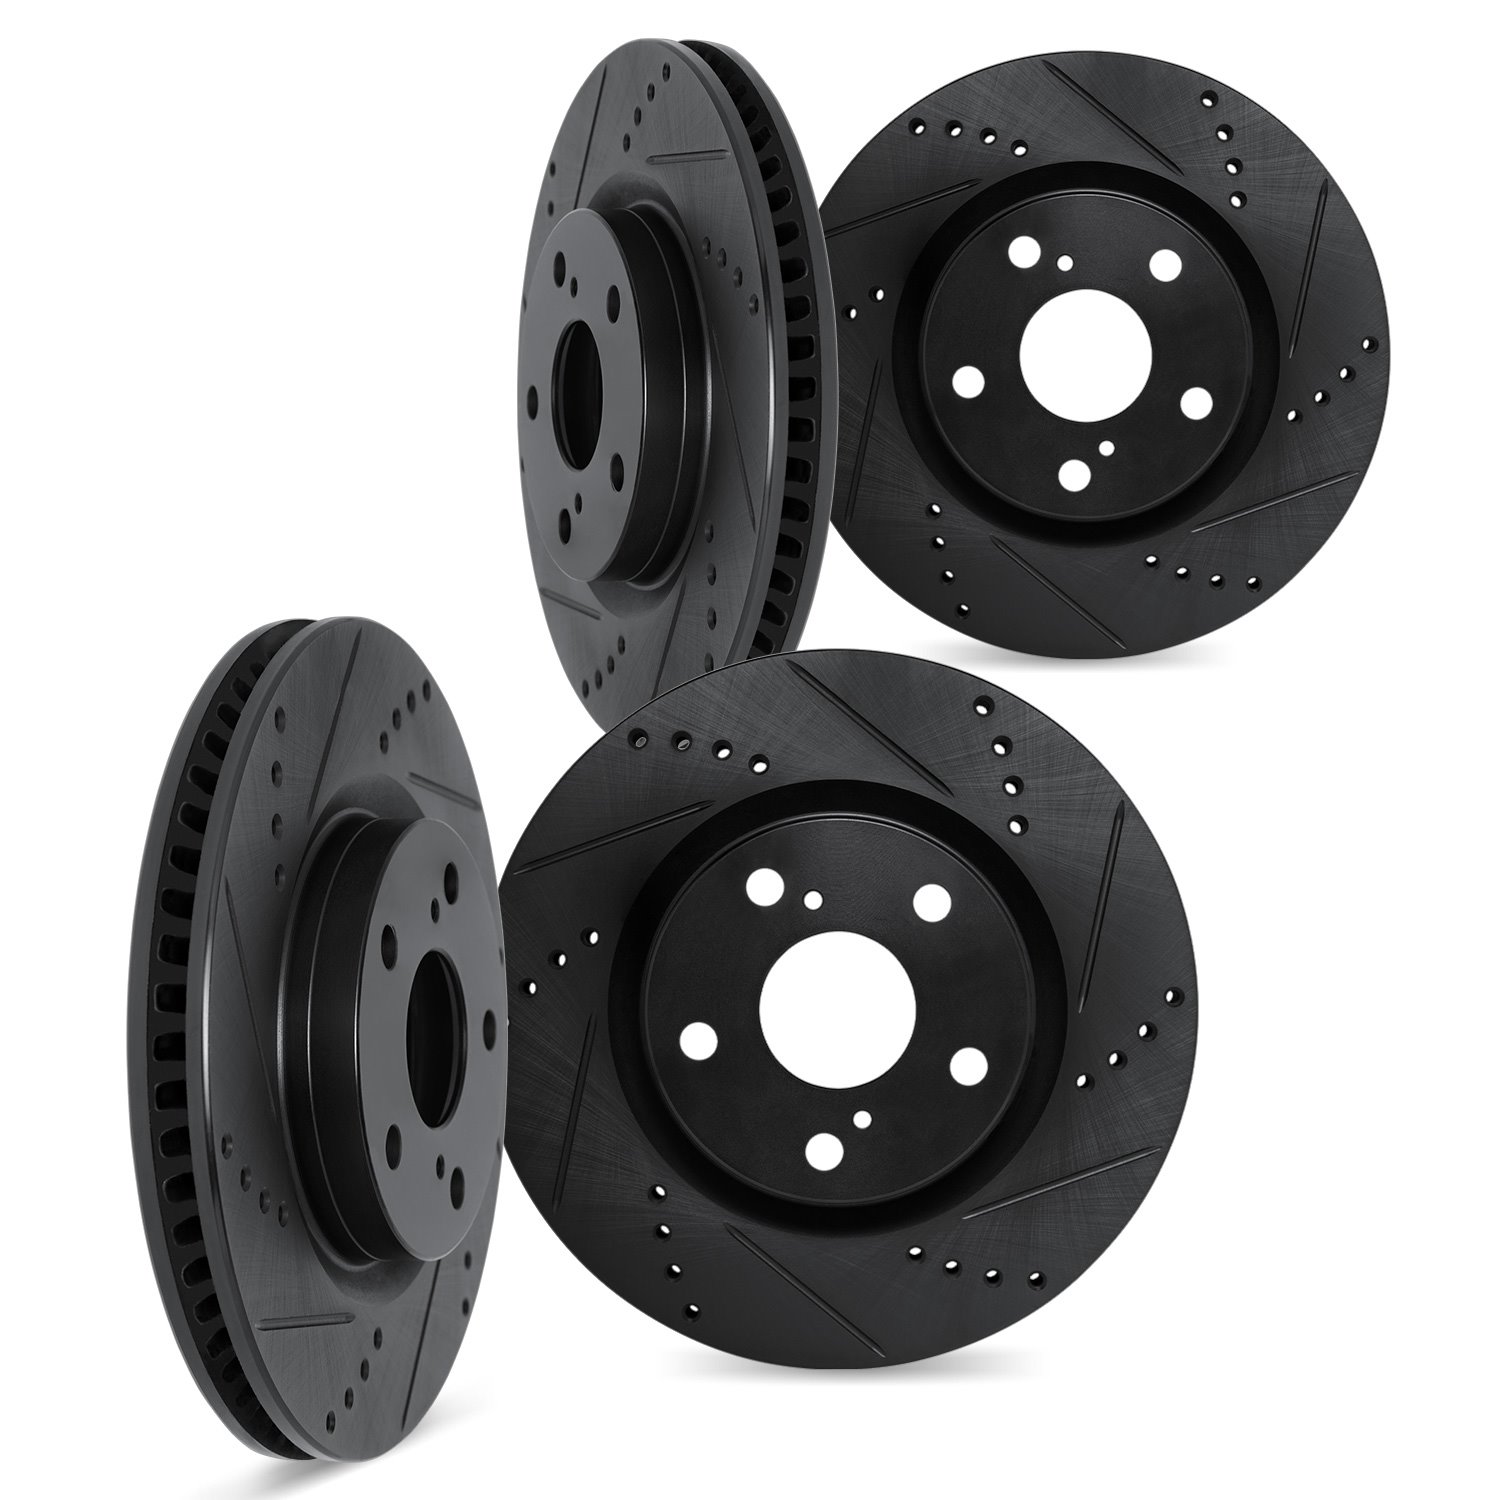 8004-58011 Drilled/Slotted Brake Rotors [Black], 1991-1996 Acura/Honda, Position: Front and Rear